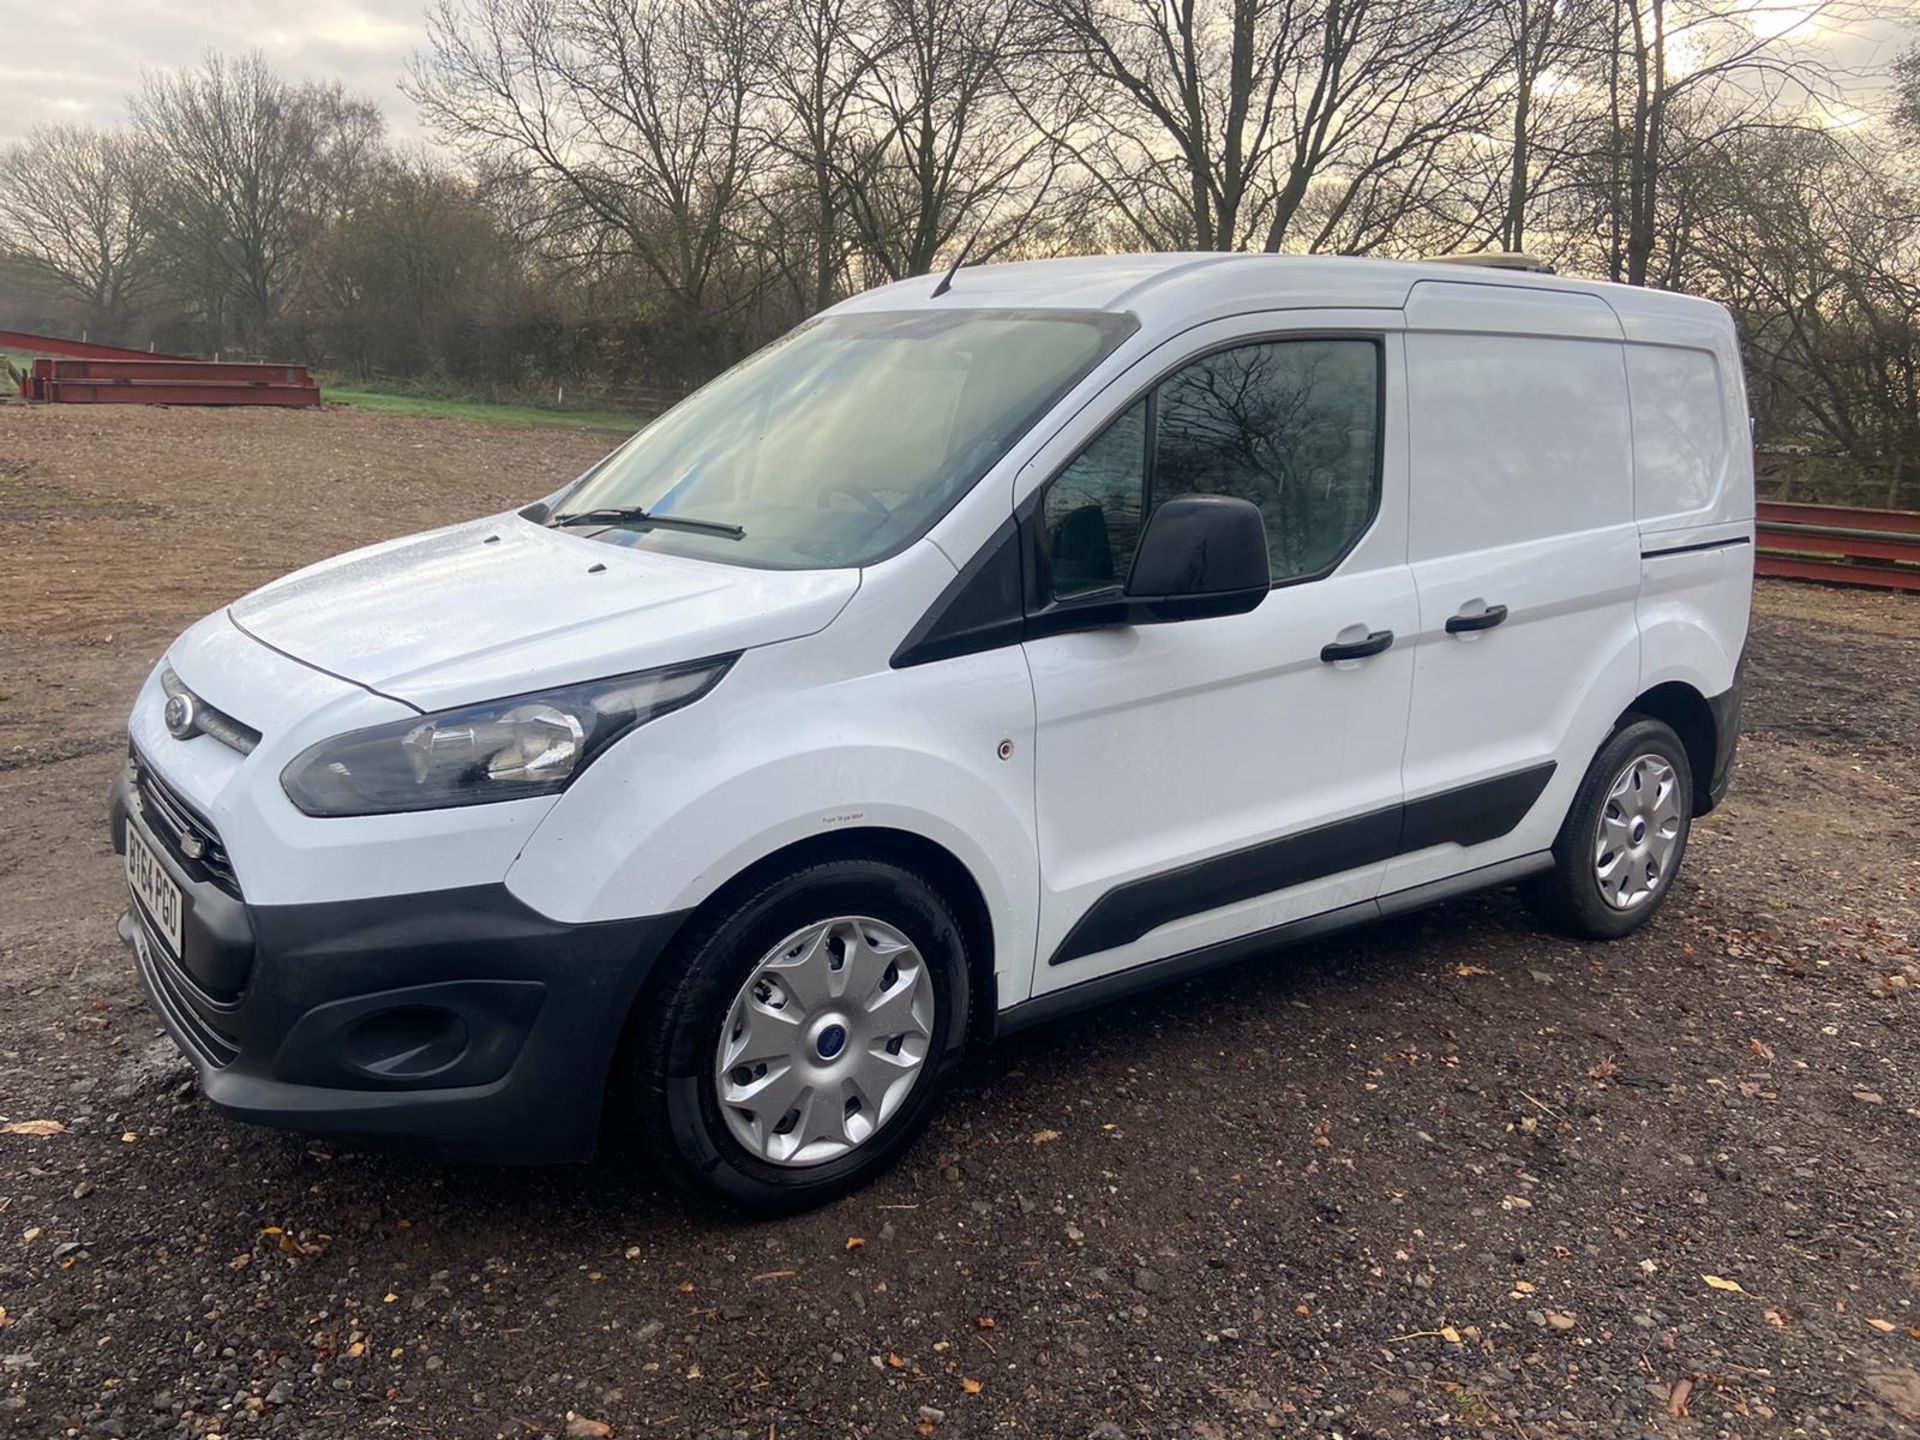 2015/64 REG FORD TRANSIT CONNECT 200 ECONETIC 1.6 DIESEL WHITE PANEL VAN, SHOWING 0 FORMER KEEPERS - Image 4 of 10